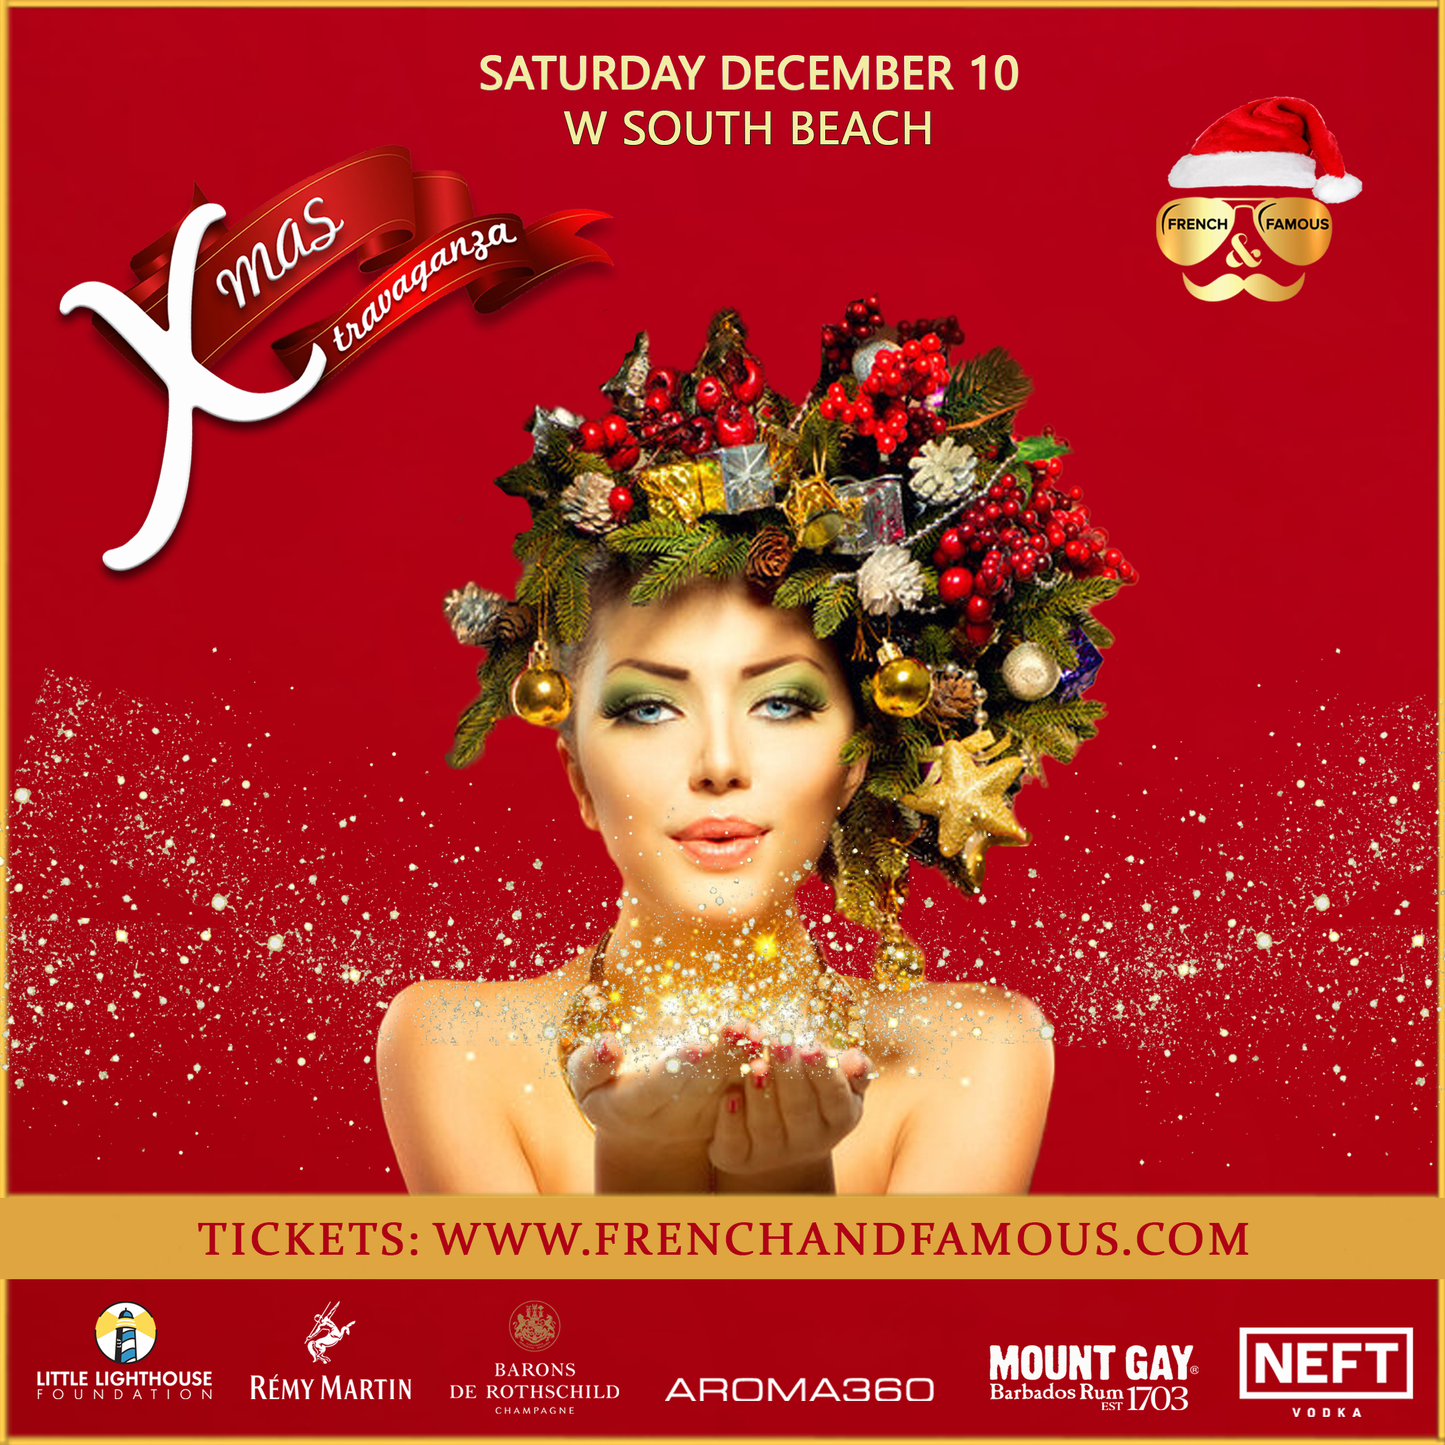 Xmas Xtravaganza and Toy Drive by French & Famous